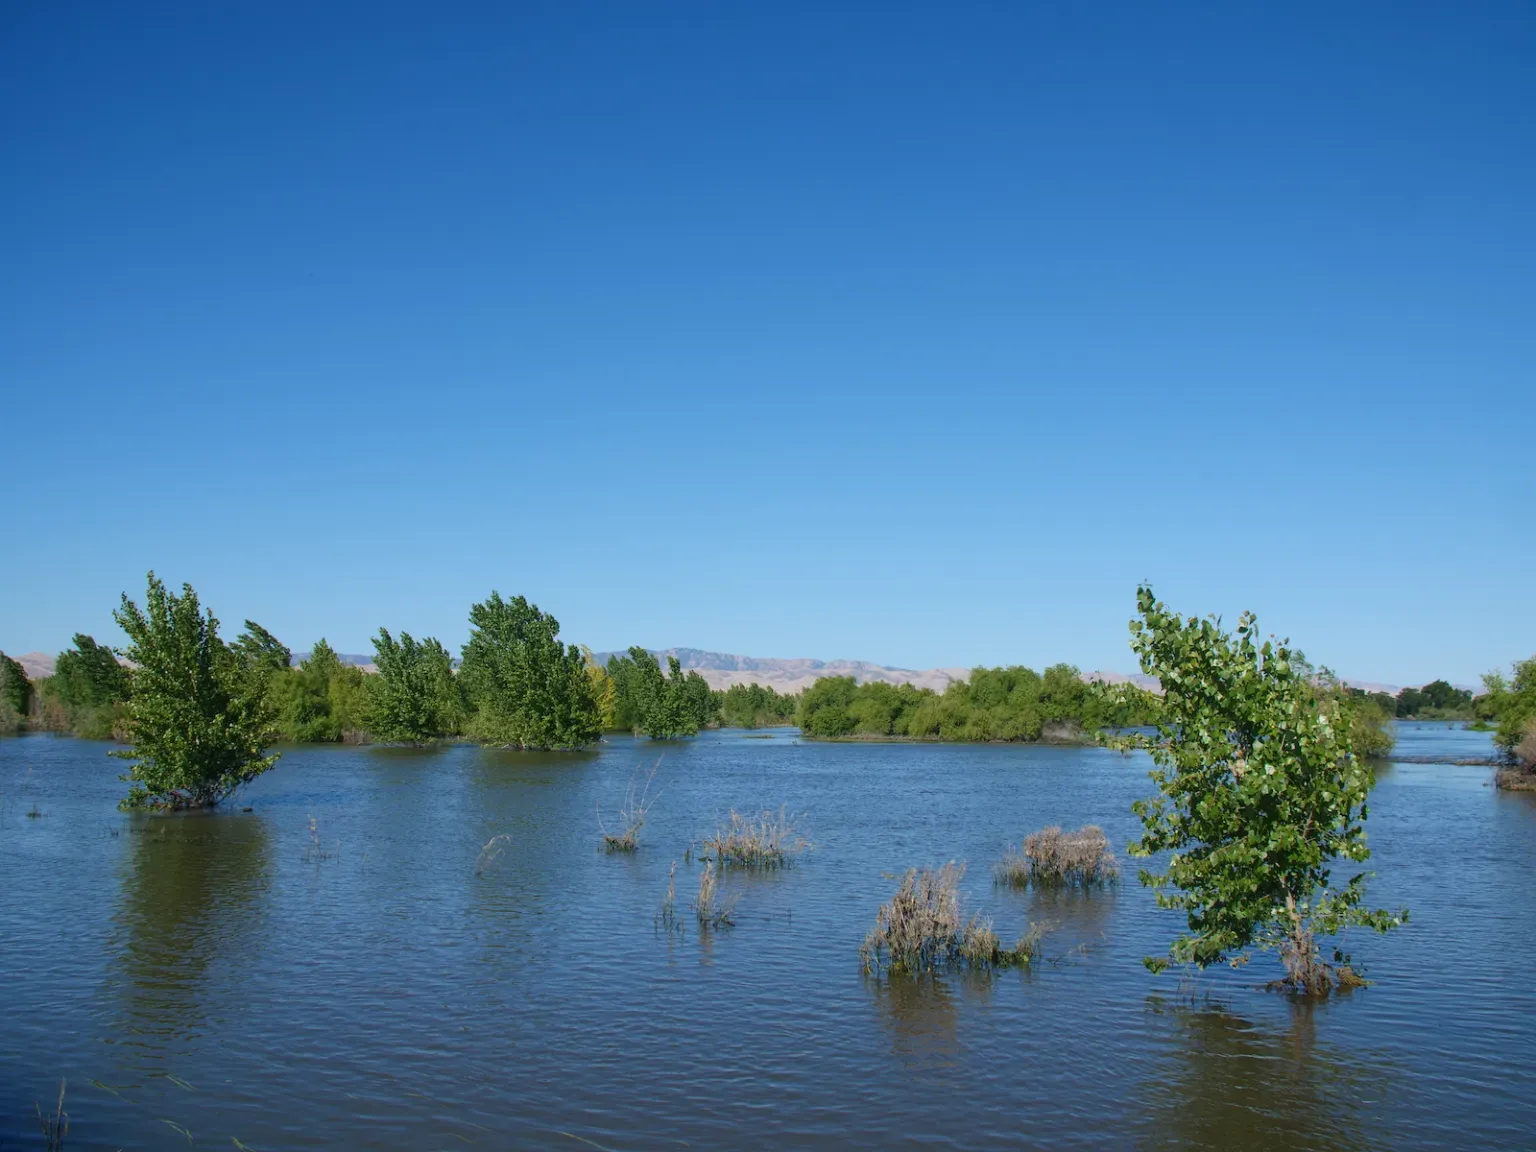 How can California solve its water woes? By flooding its best farmland